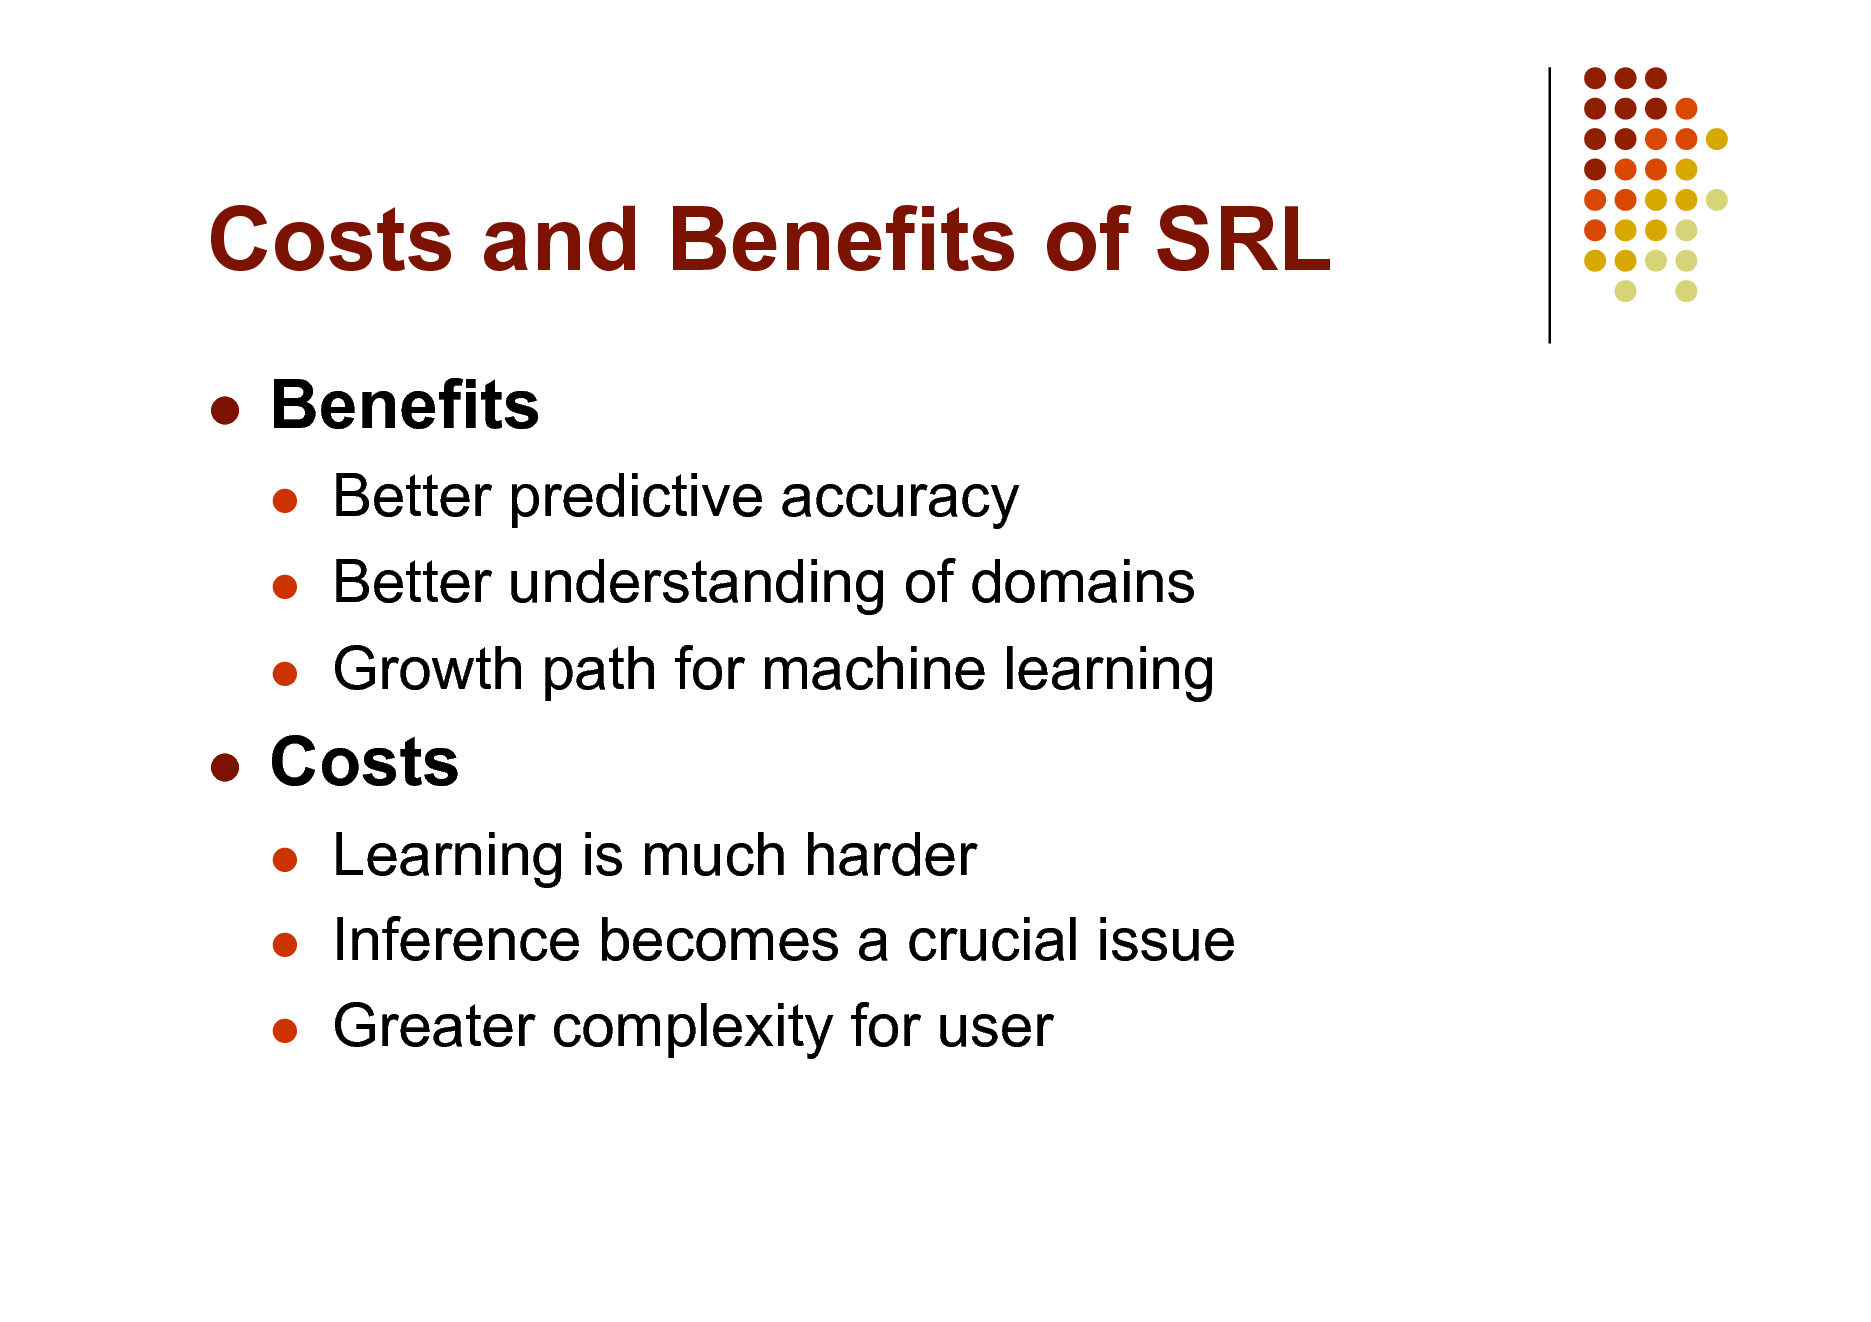 Slide: Costs and Benefits of SRL


Benefits
  

Better predictive accuracy Better understanding of domains Growth path for machine learning Learning is much harder Inference becomes a crucial issue Greater complexity for user



Costs
  

